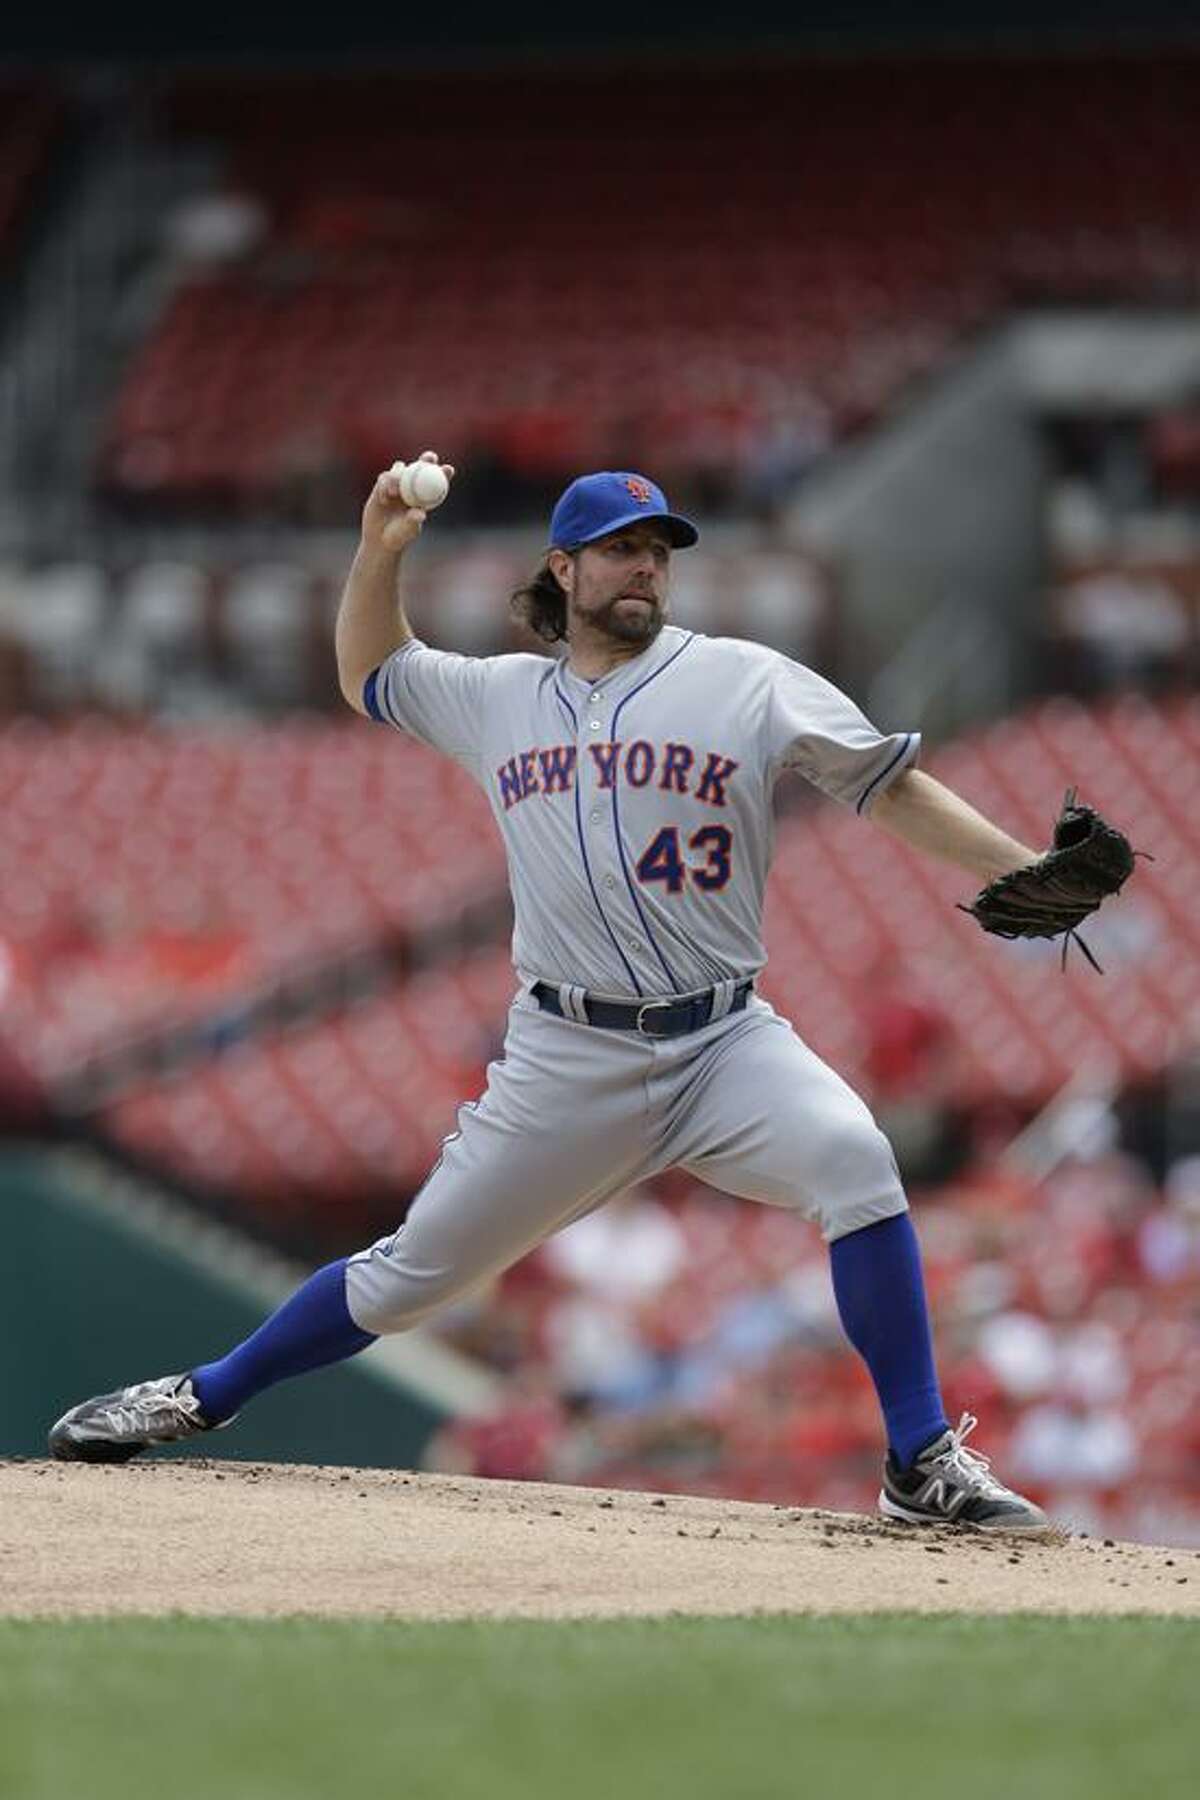 R.A. Dickey Records 18th Victory for Mets - The New York Times